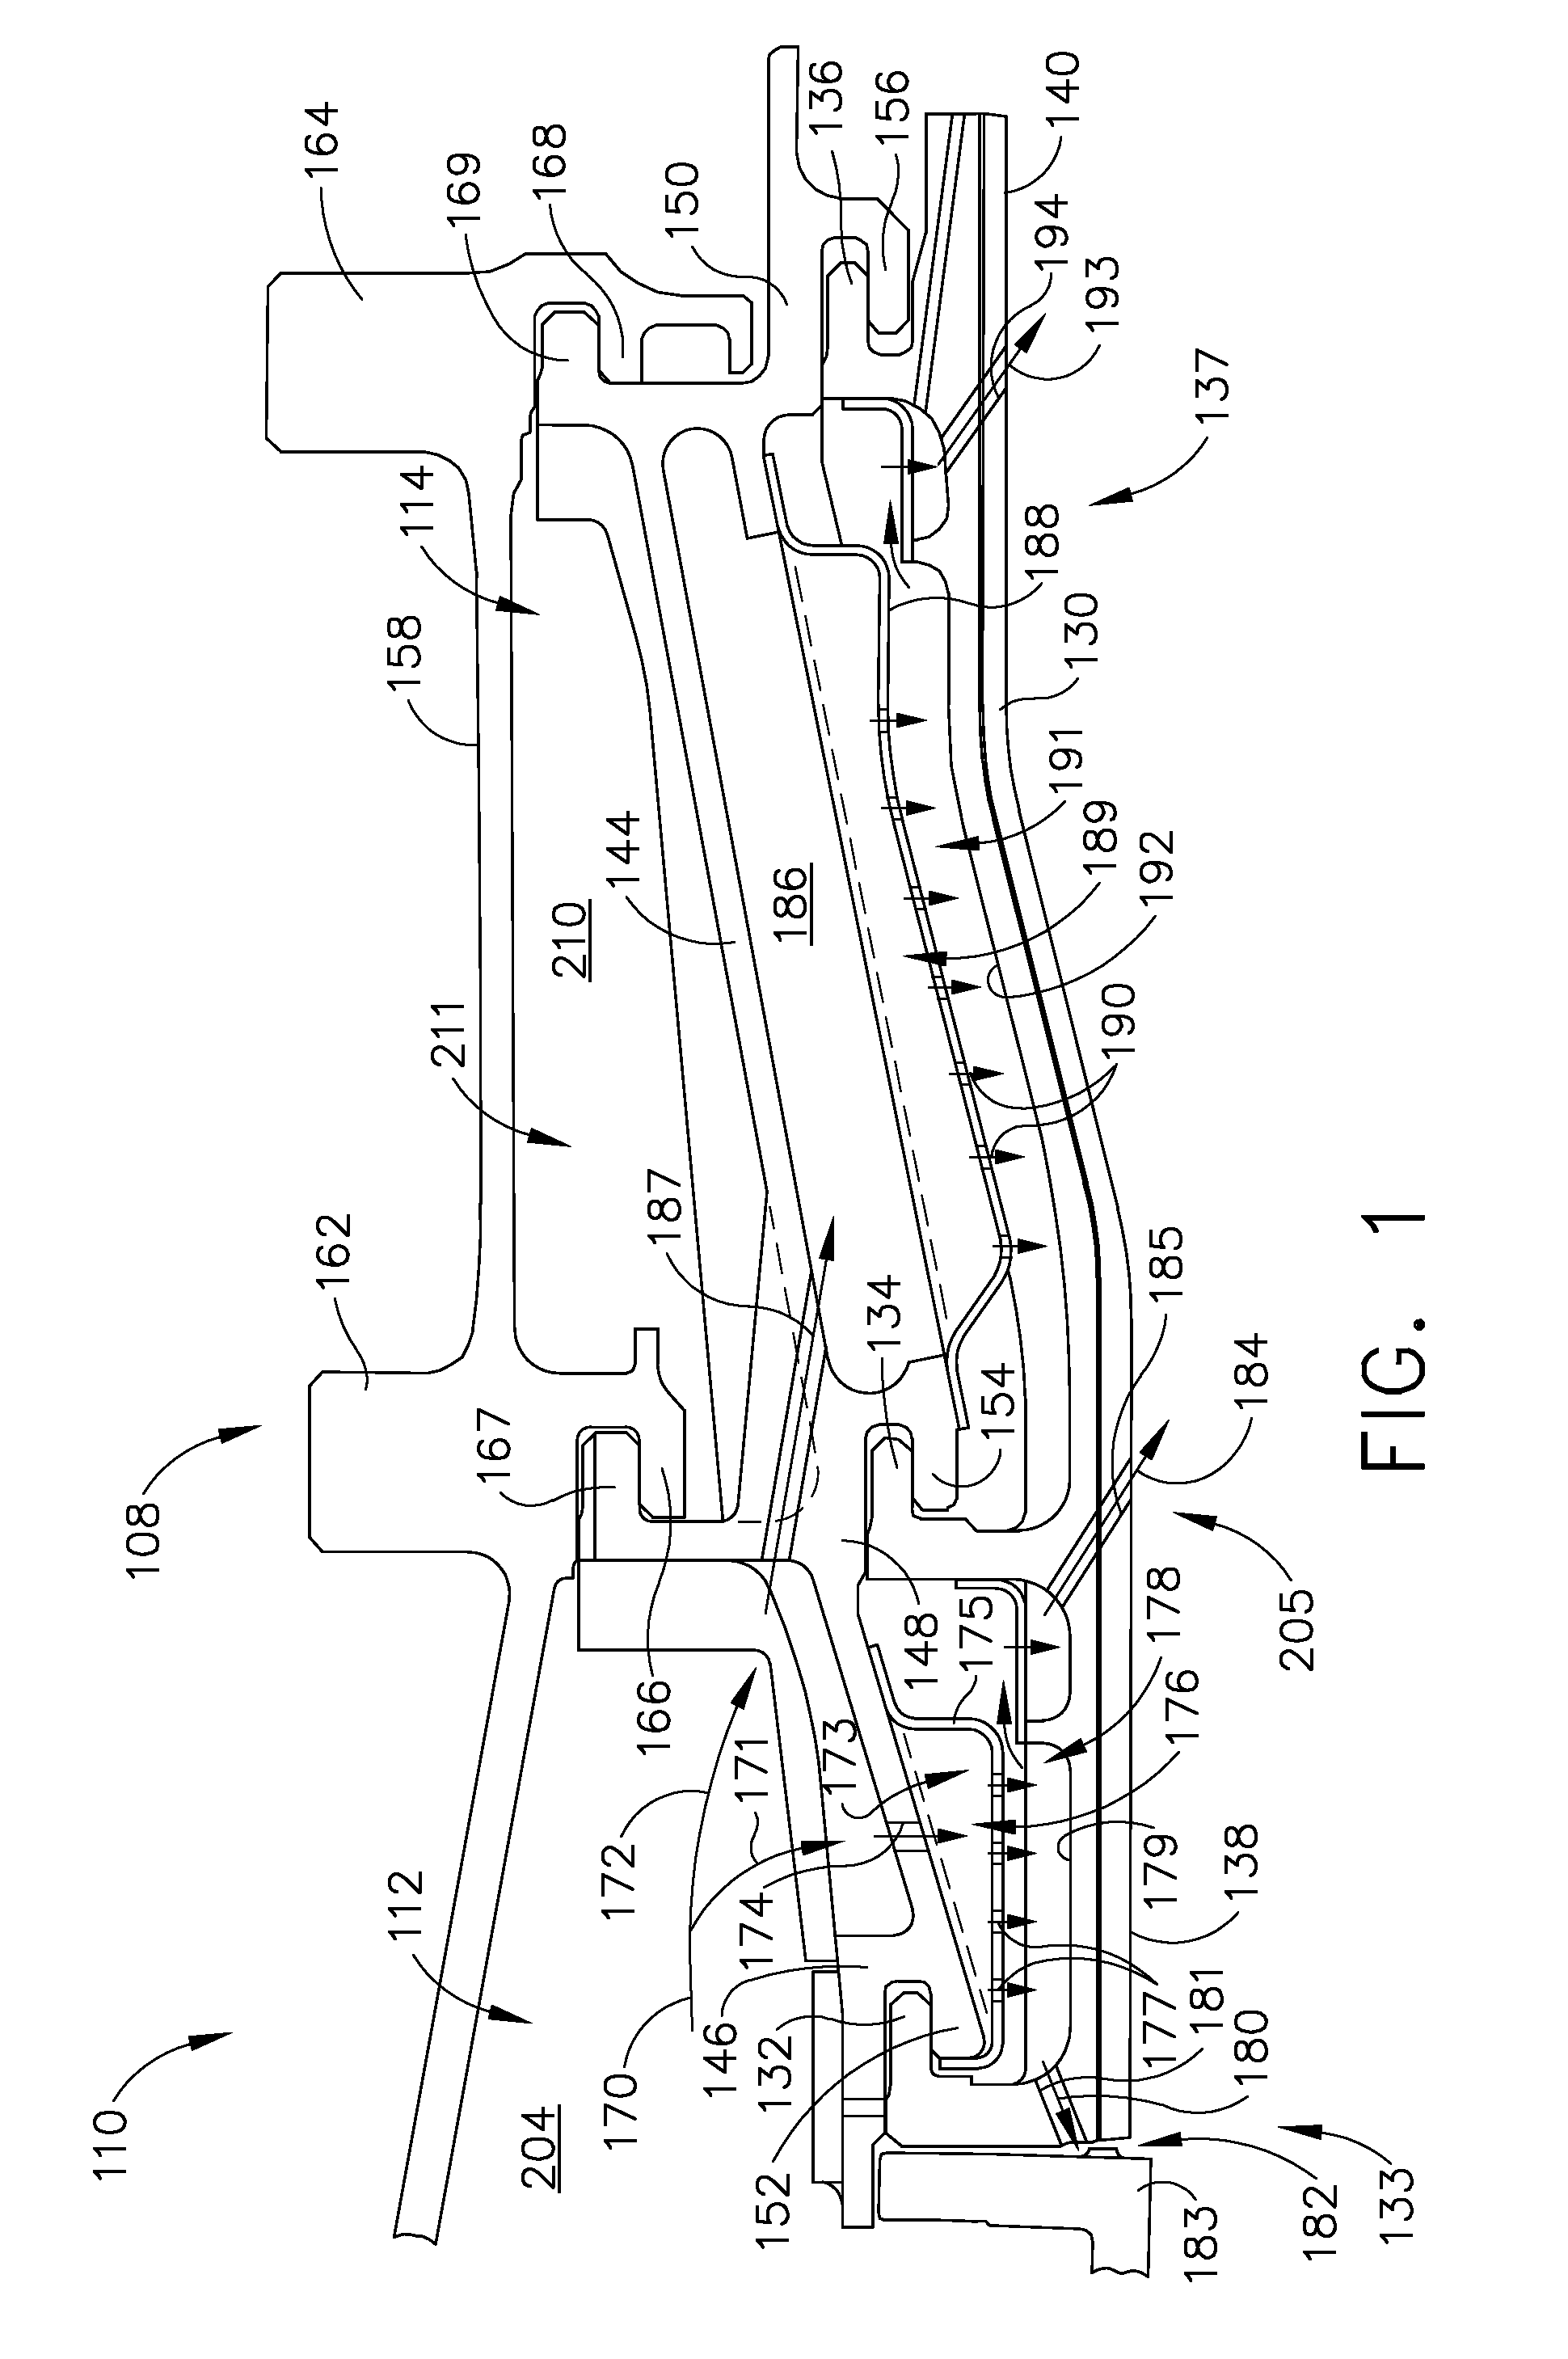 Method and system to facilitate enhanced local cooling of turbine engines